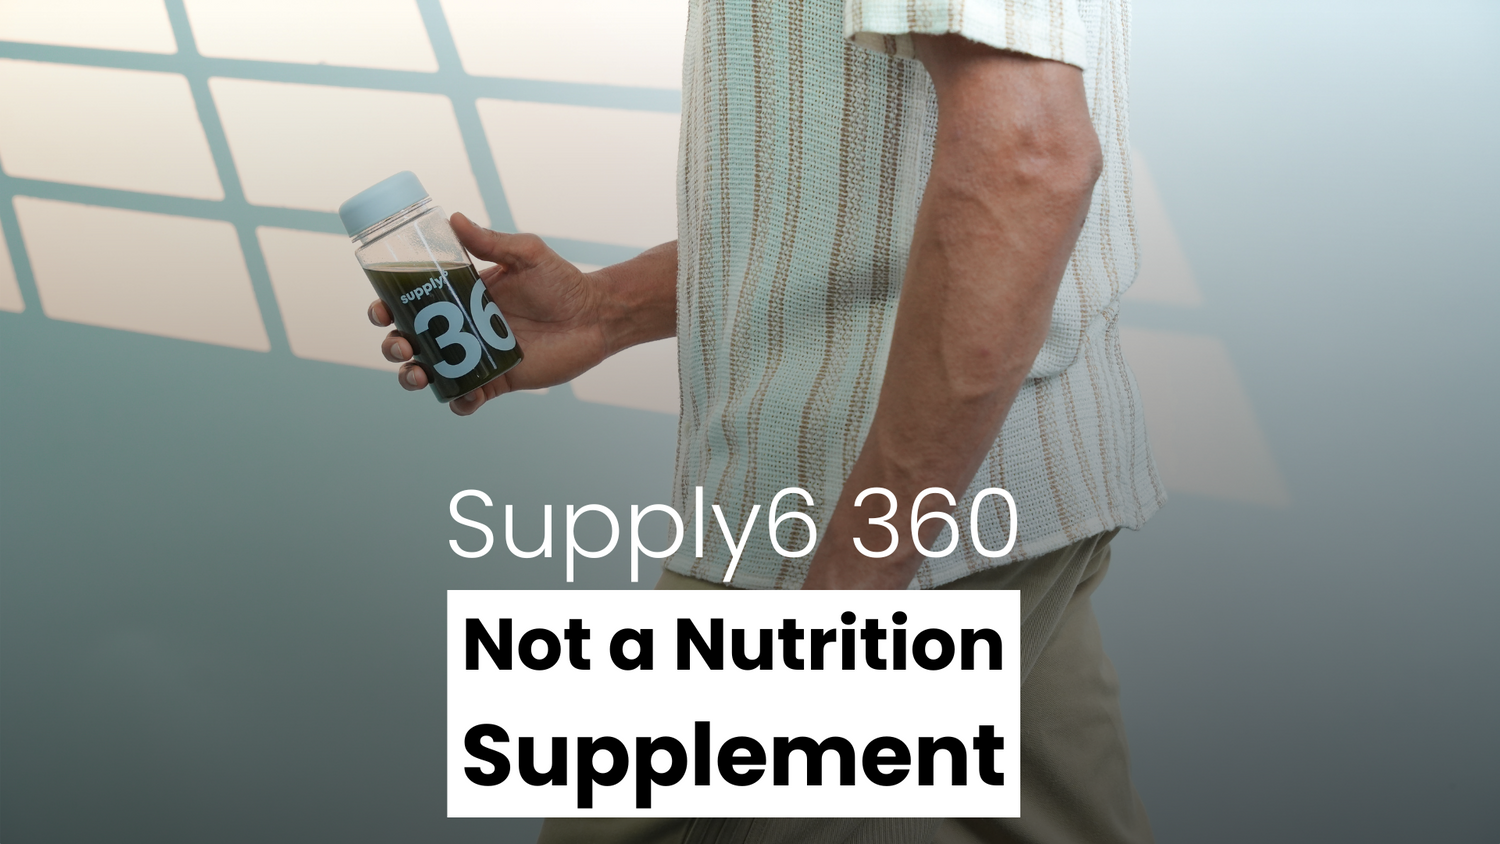 How is Supply6 360 different from other supplements?